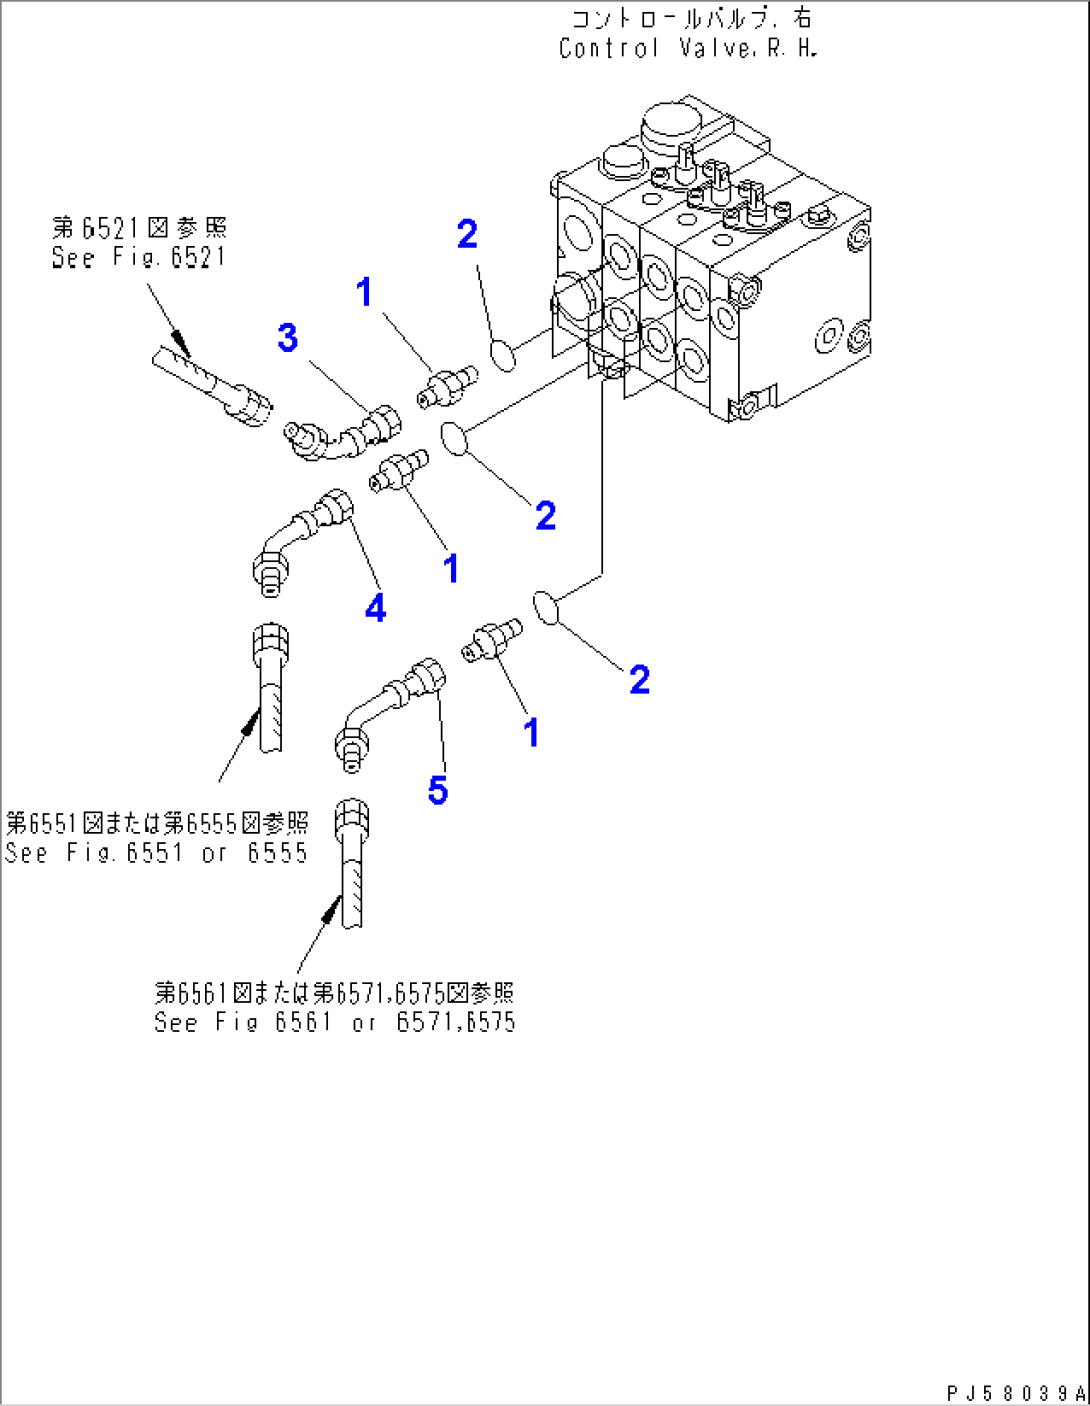 HYDRAULIC PIPING (CONTROL VALVE CONNECTING PARTS¤ R.H.)